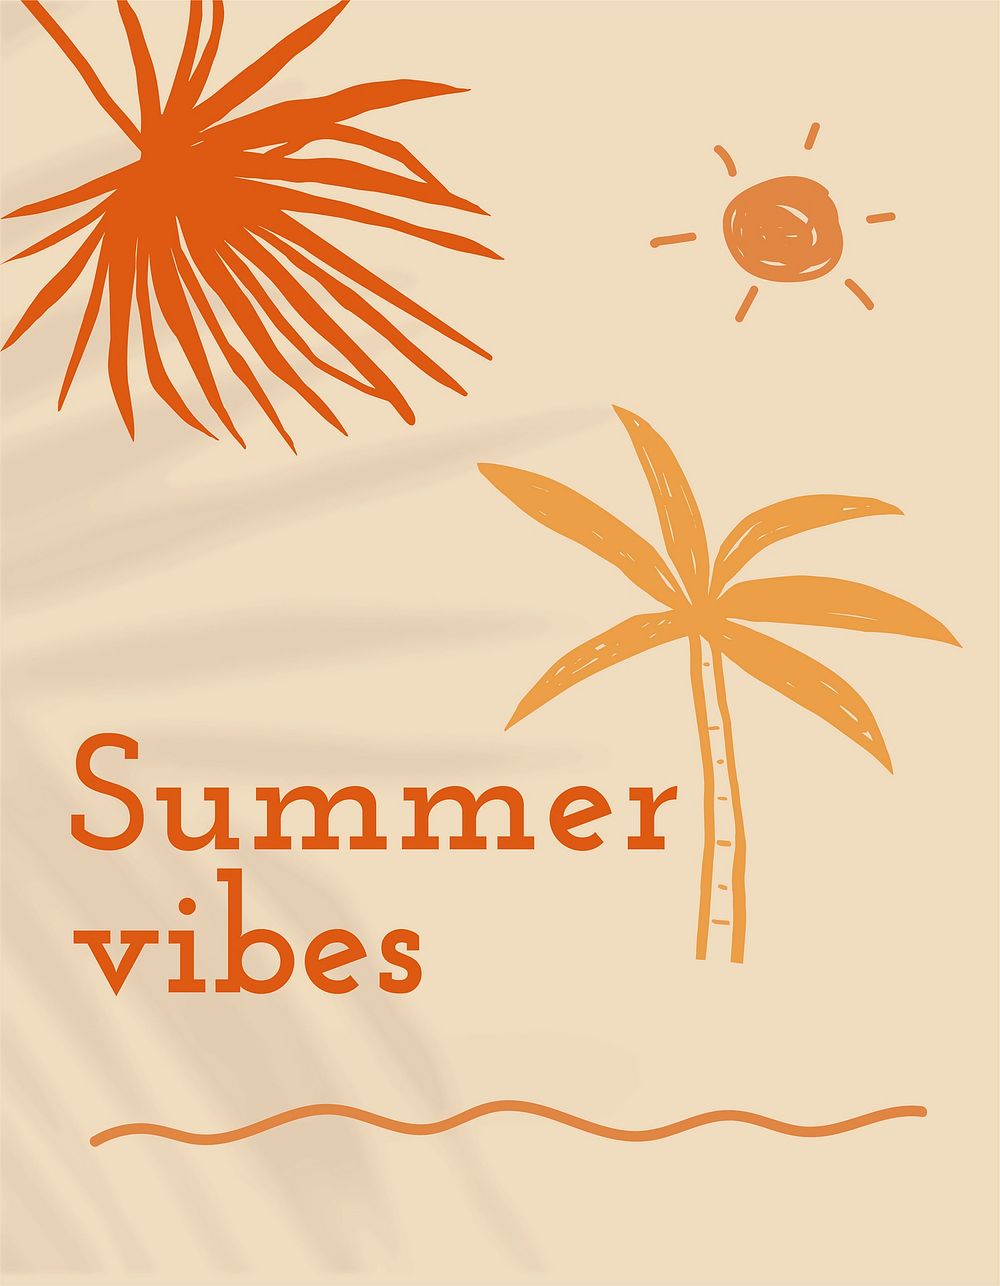 Summer vibes quote aesthetic doodle flyer